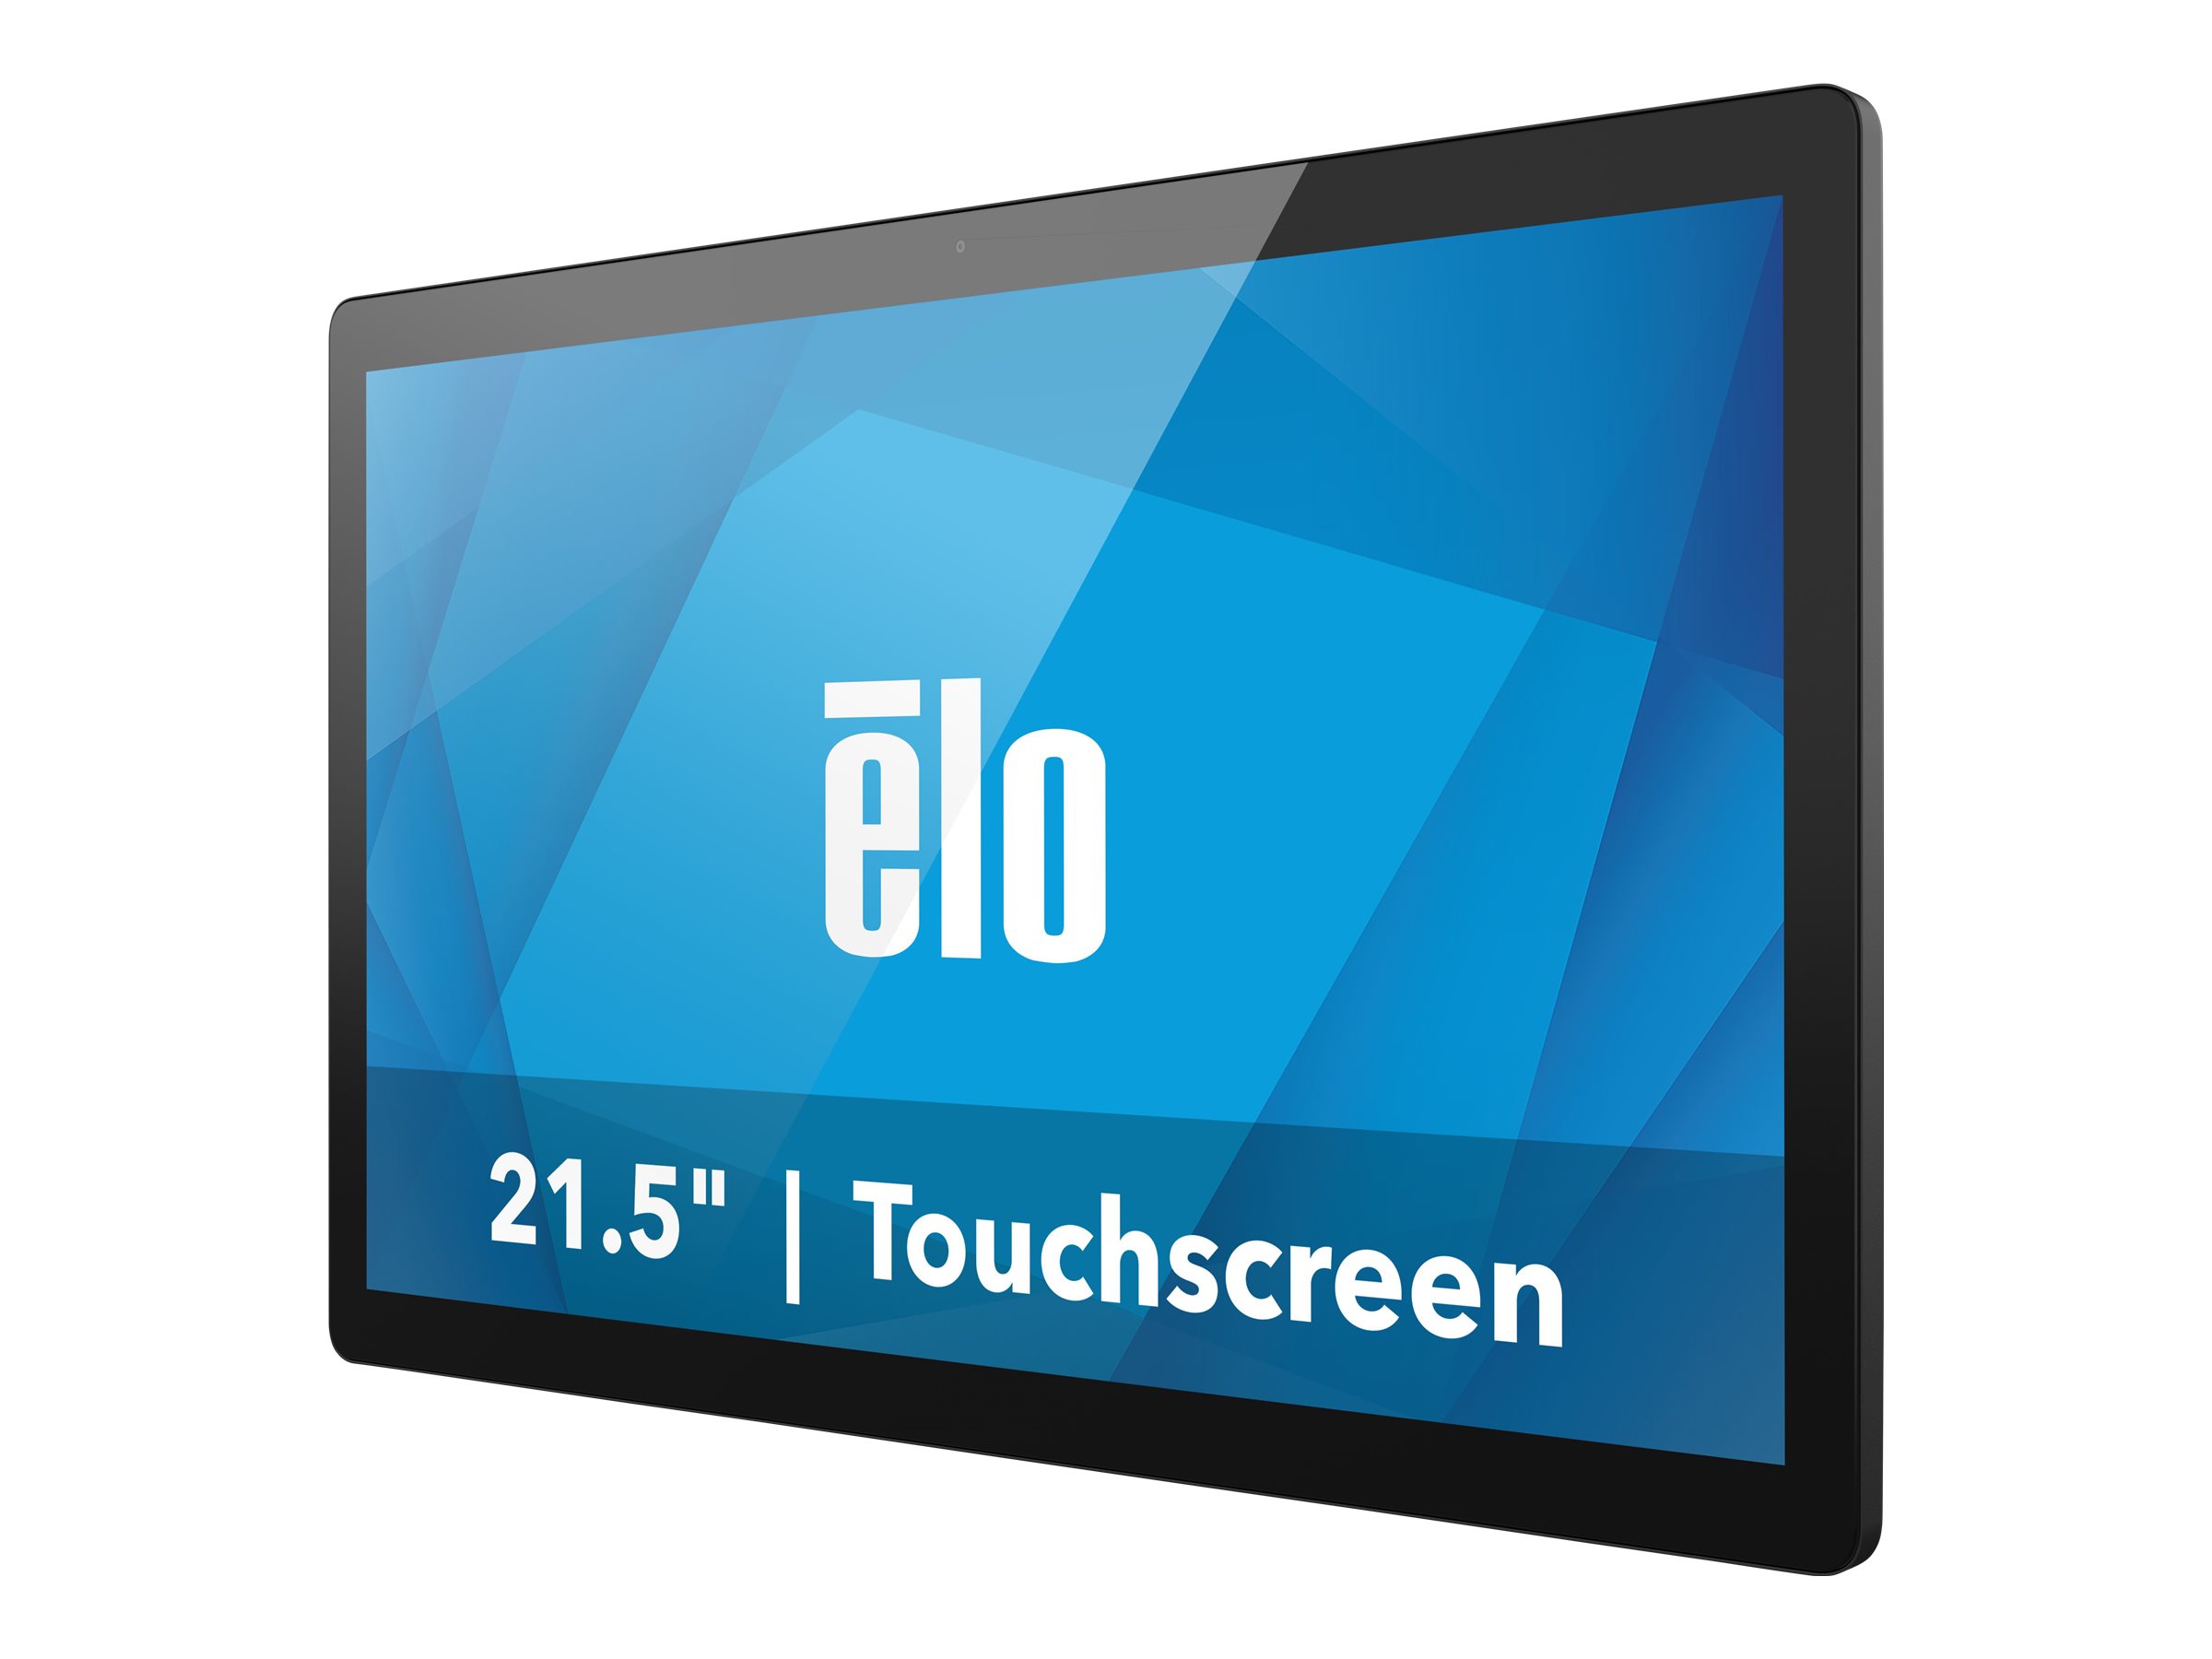 Elo Touch Solutions Elo I-Series 4.0 - Value - All-in-One (Komplettlösung) - 1 RK3399 - RAM 4 GB - Flash 32 GB - GigE - WLAN: 802.11a/b/g/n/ac, Bluetooth 5.0 - Android 10 - Monitor: LED 54.61 cm (21.5")